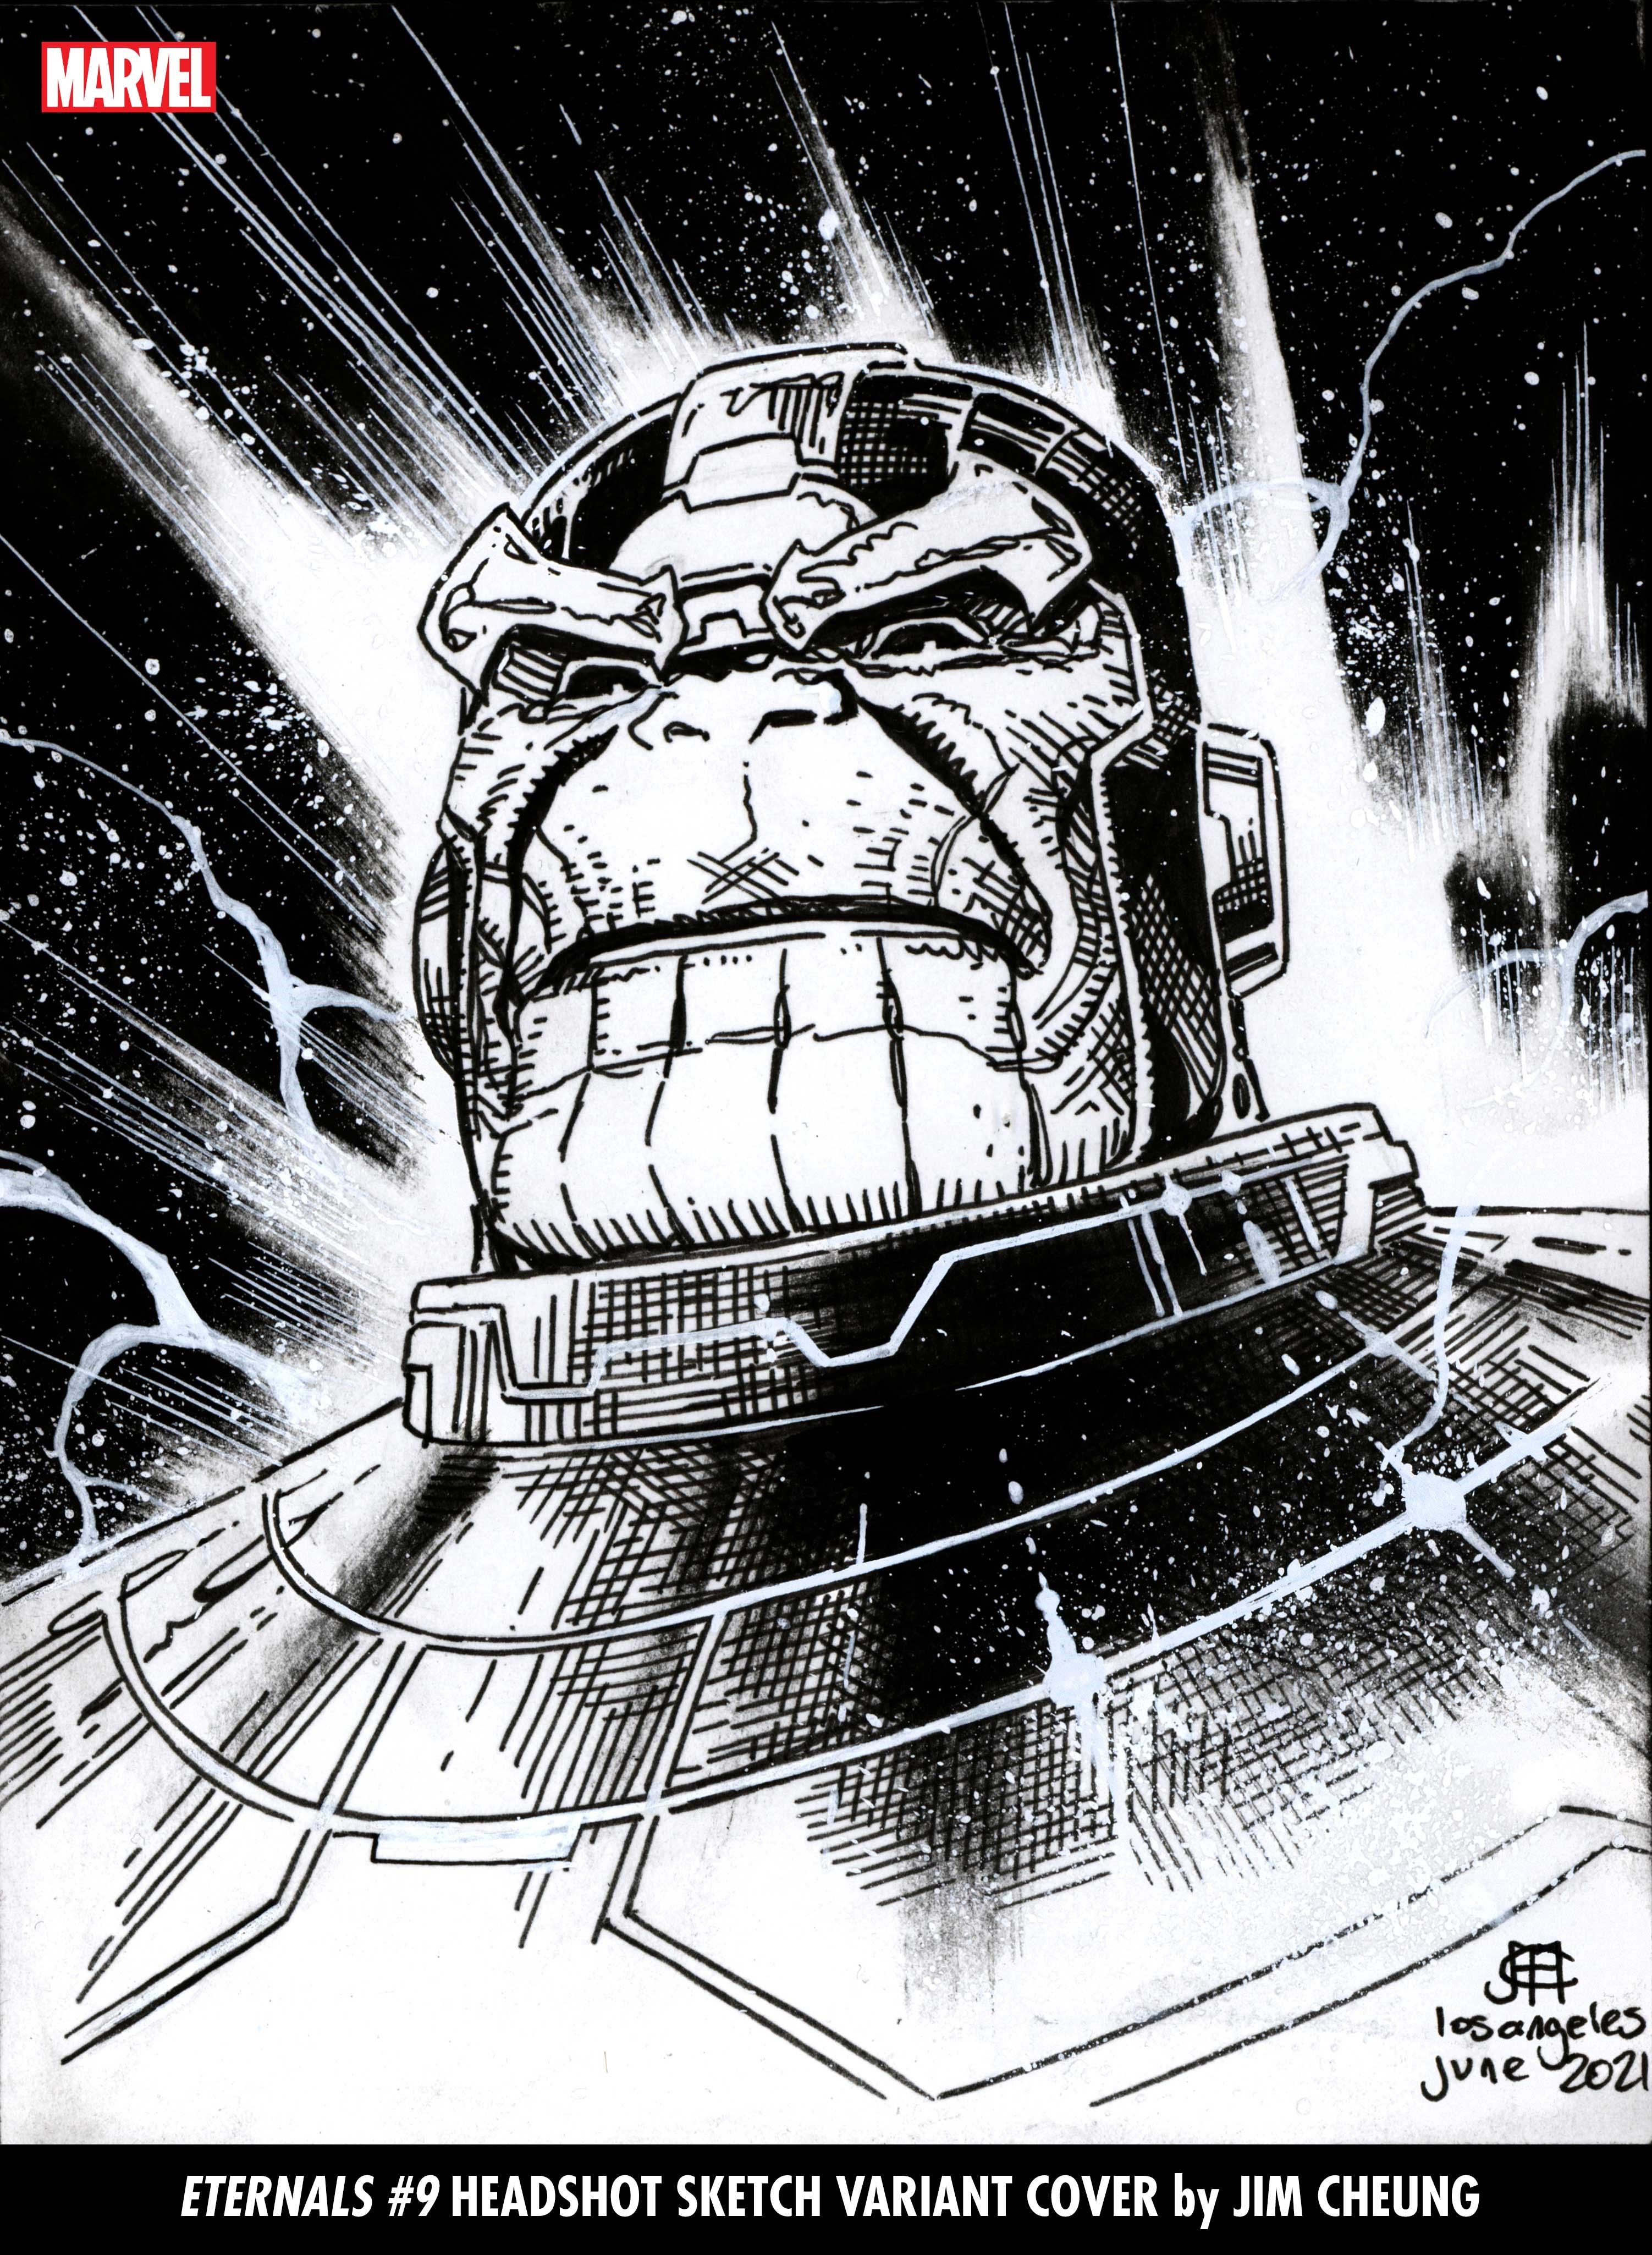 Black and white headshot cover of Thanos by Jim Cheung